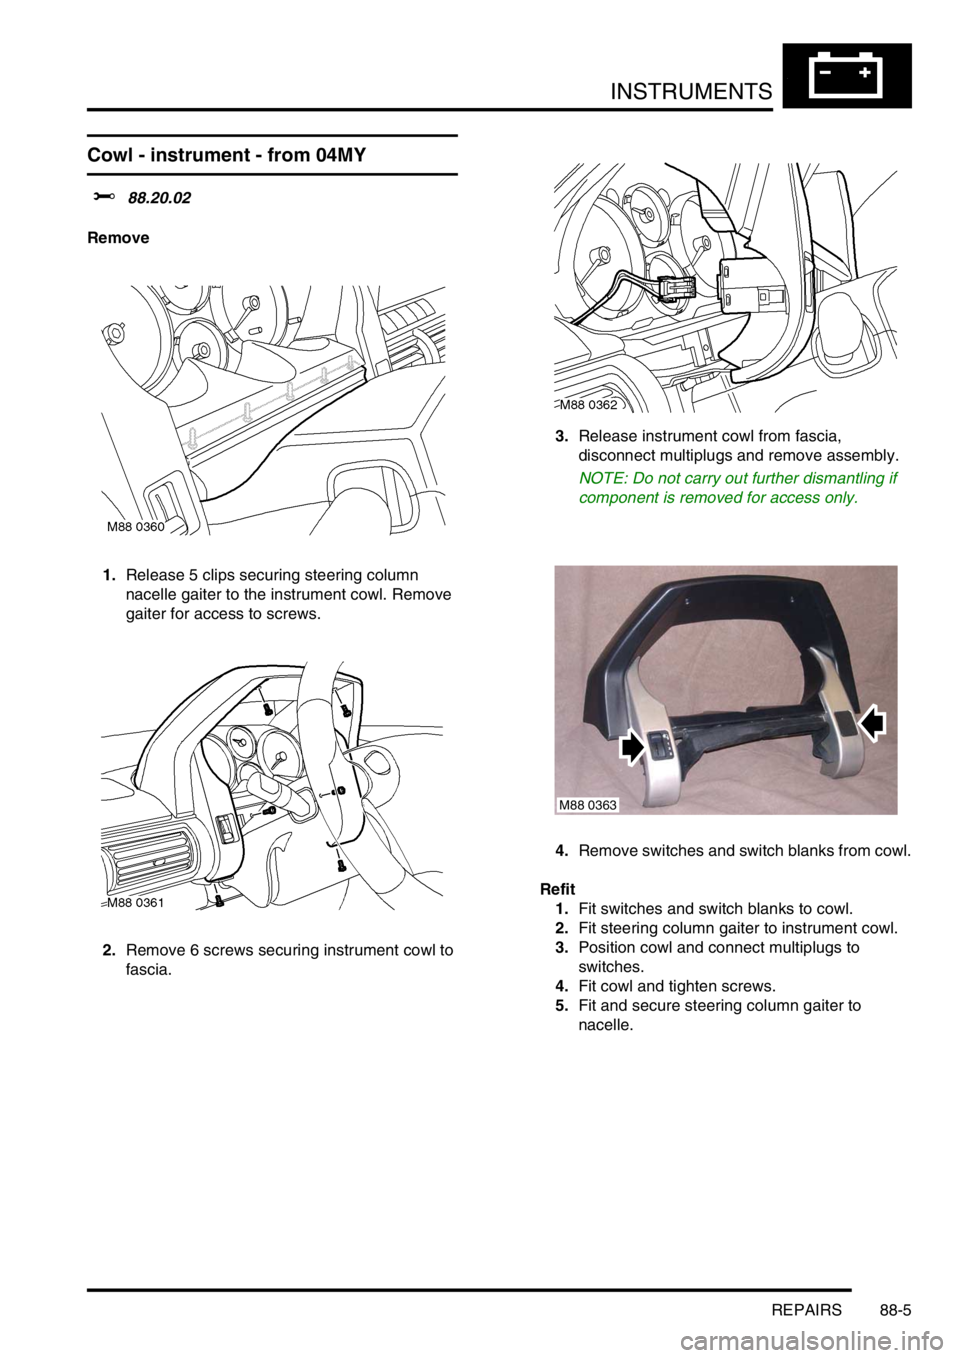 LAND ROVER FREELANDER 2001  Workshop Manual INSTRUMENTS
REPAIRS 88-5
Cowl - instrument - from 04MY
$% 88.20.02
Remove
1.Release 5 clips securing steering column 
nacelle gaiter to the instrument cowl. Remove 
gaiter for access to screws.
2.Remo